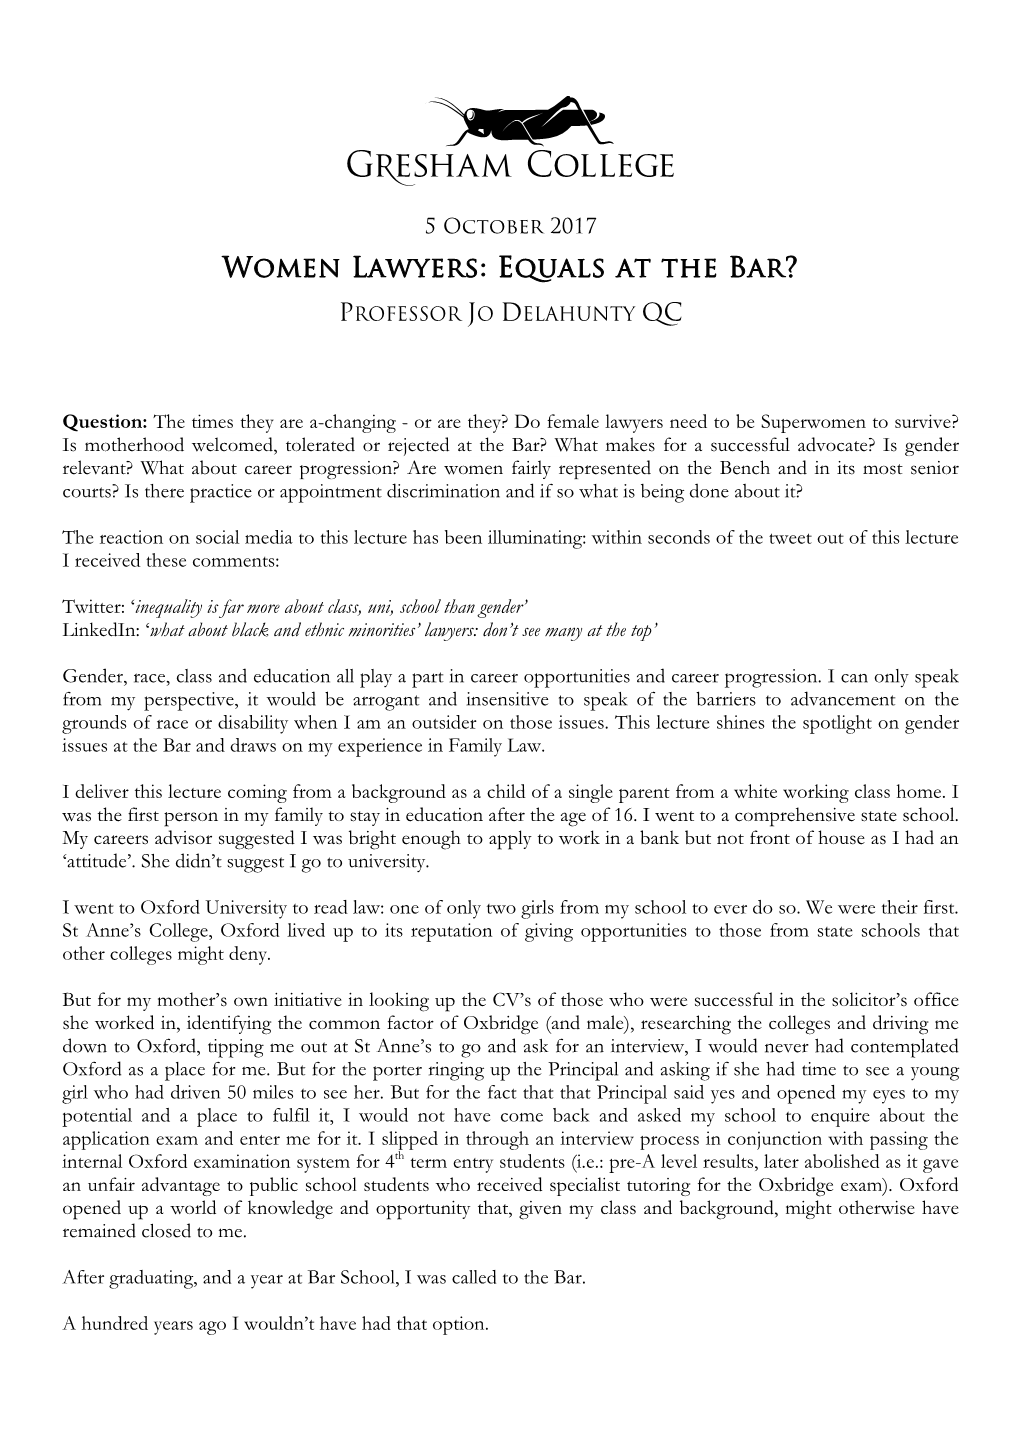 Women Lawyers: Equals at the Bar?